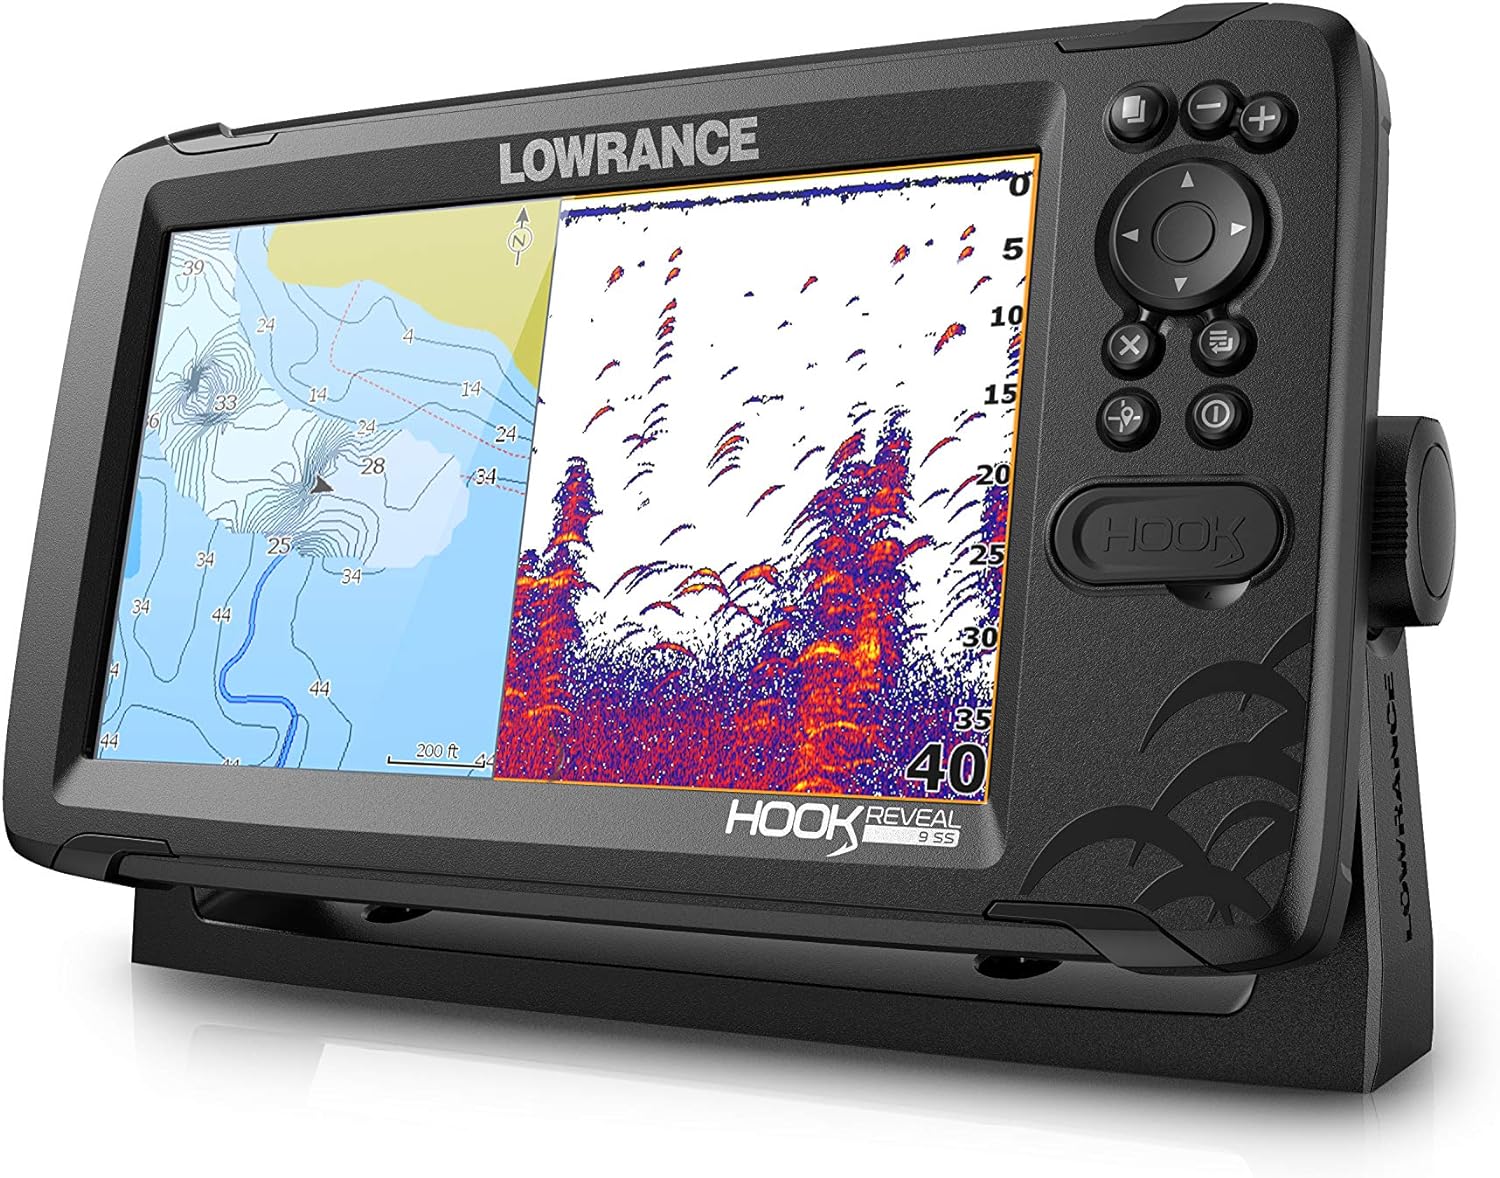 Lowrance Hook Reveal 9 inch Fishfinders with Preloaded C-MAP Options - Lowrance Hook Reveal 9 Inch Fishfinders Review